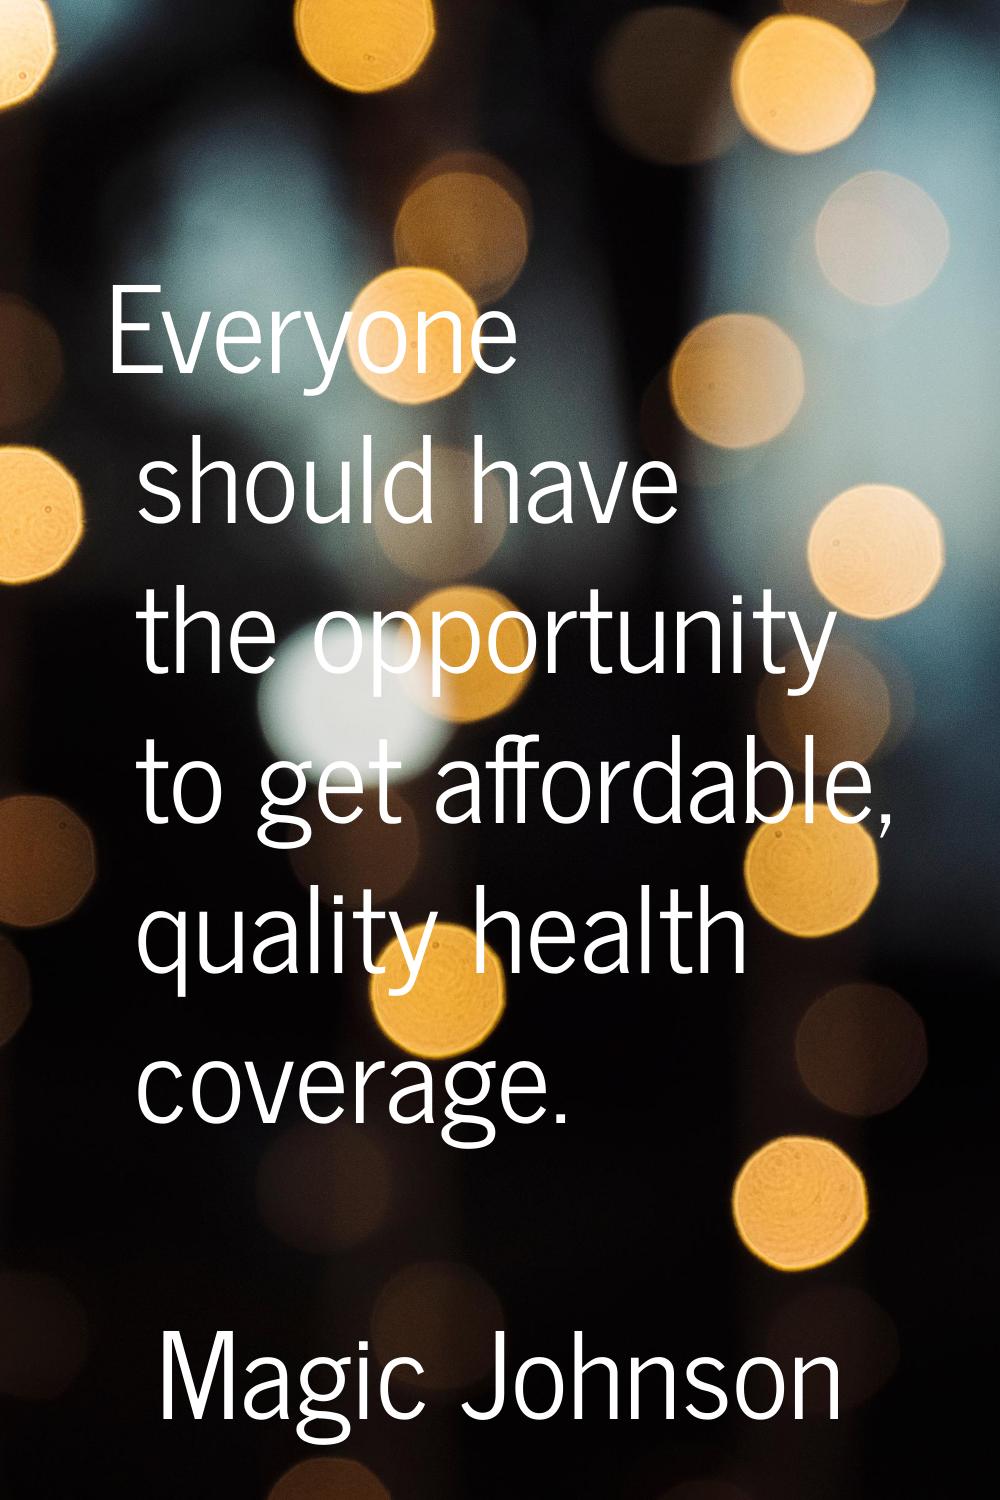 Everyone should have the opportunity to get affordable, quality health coverage.